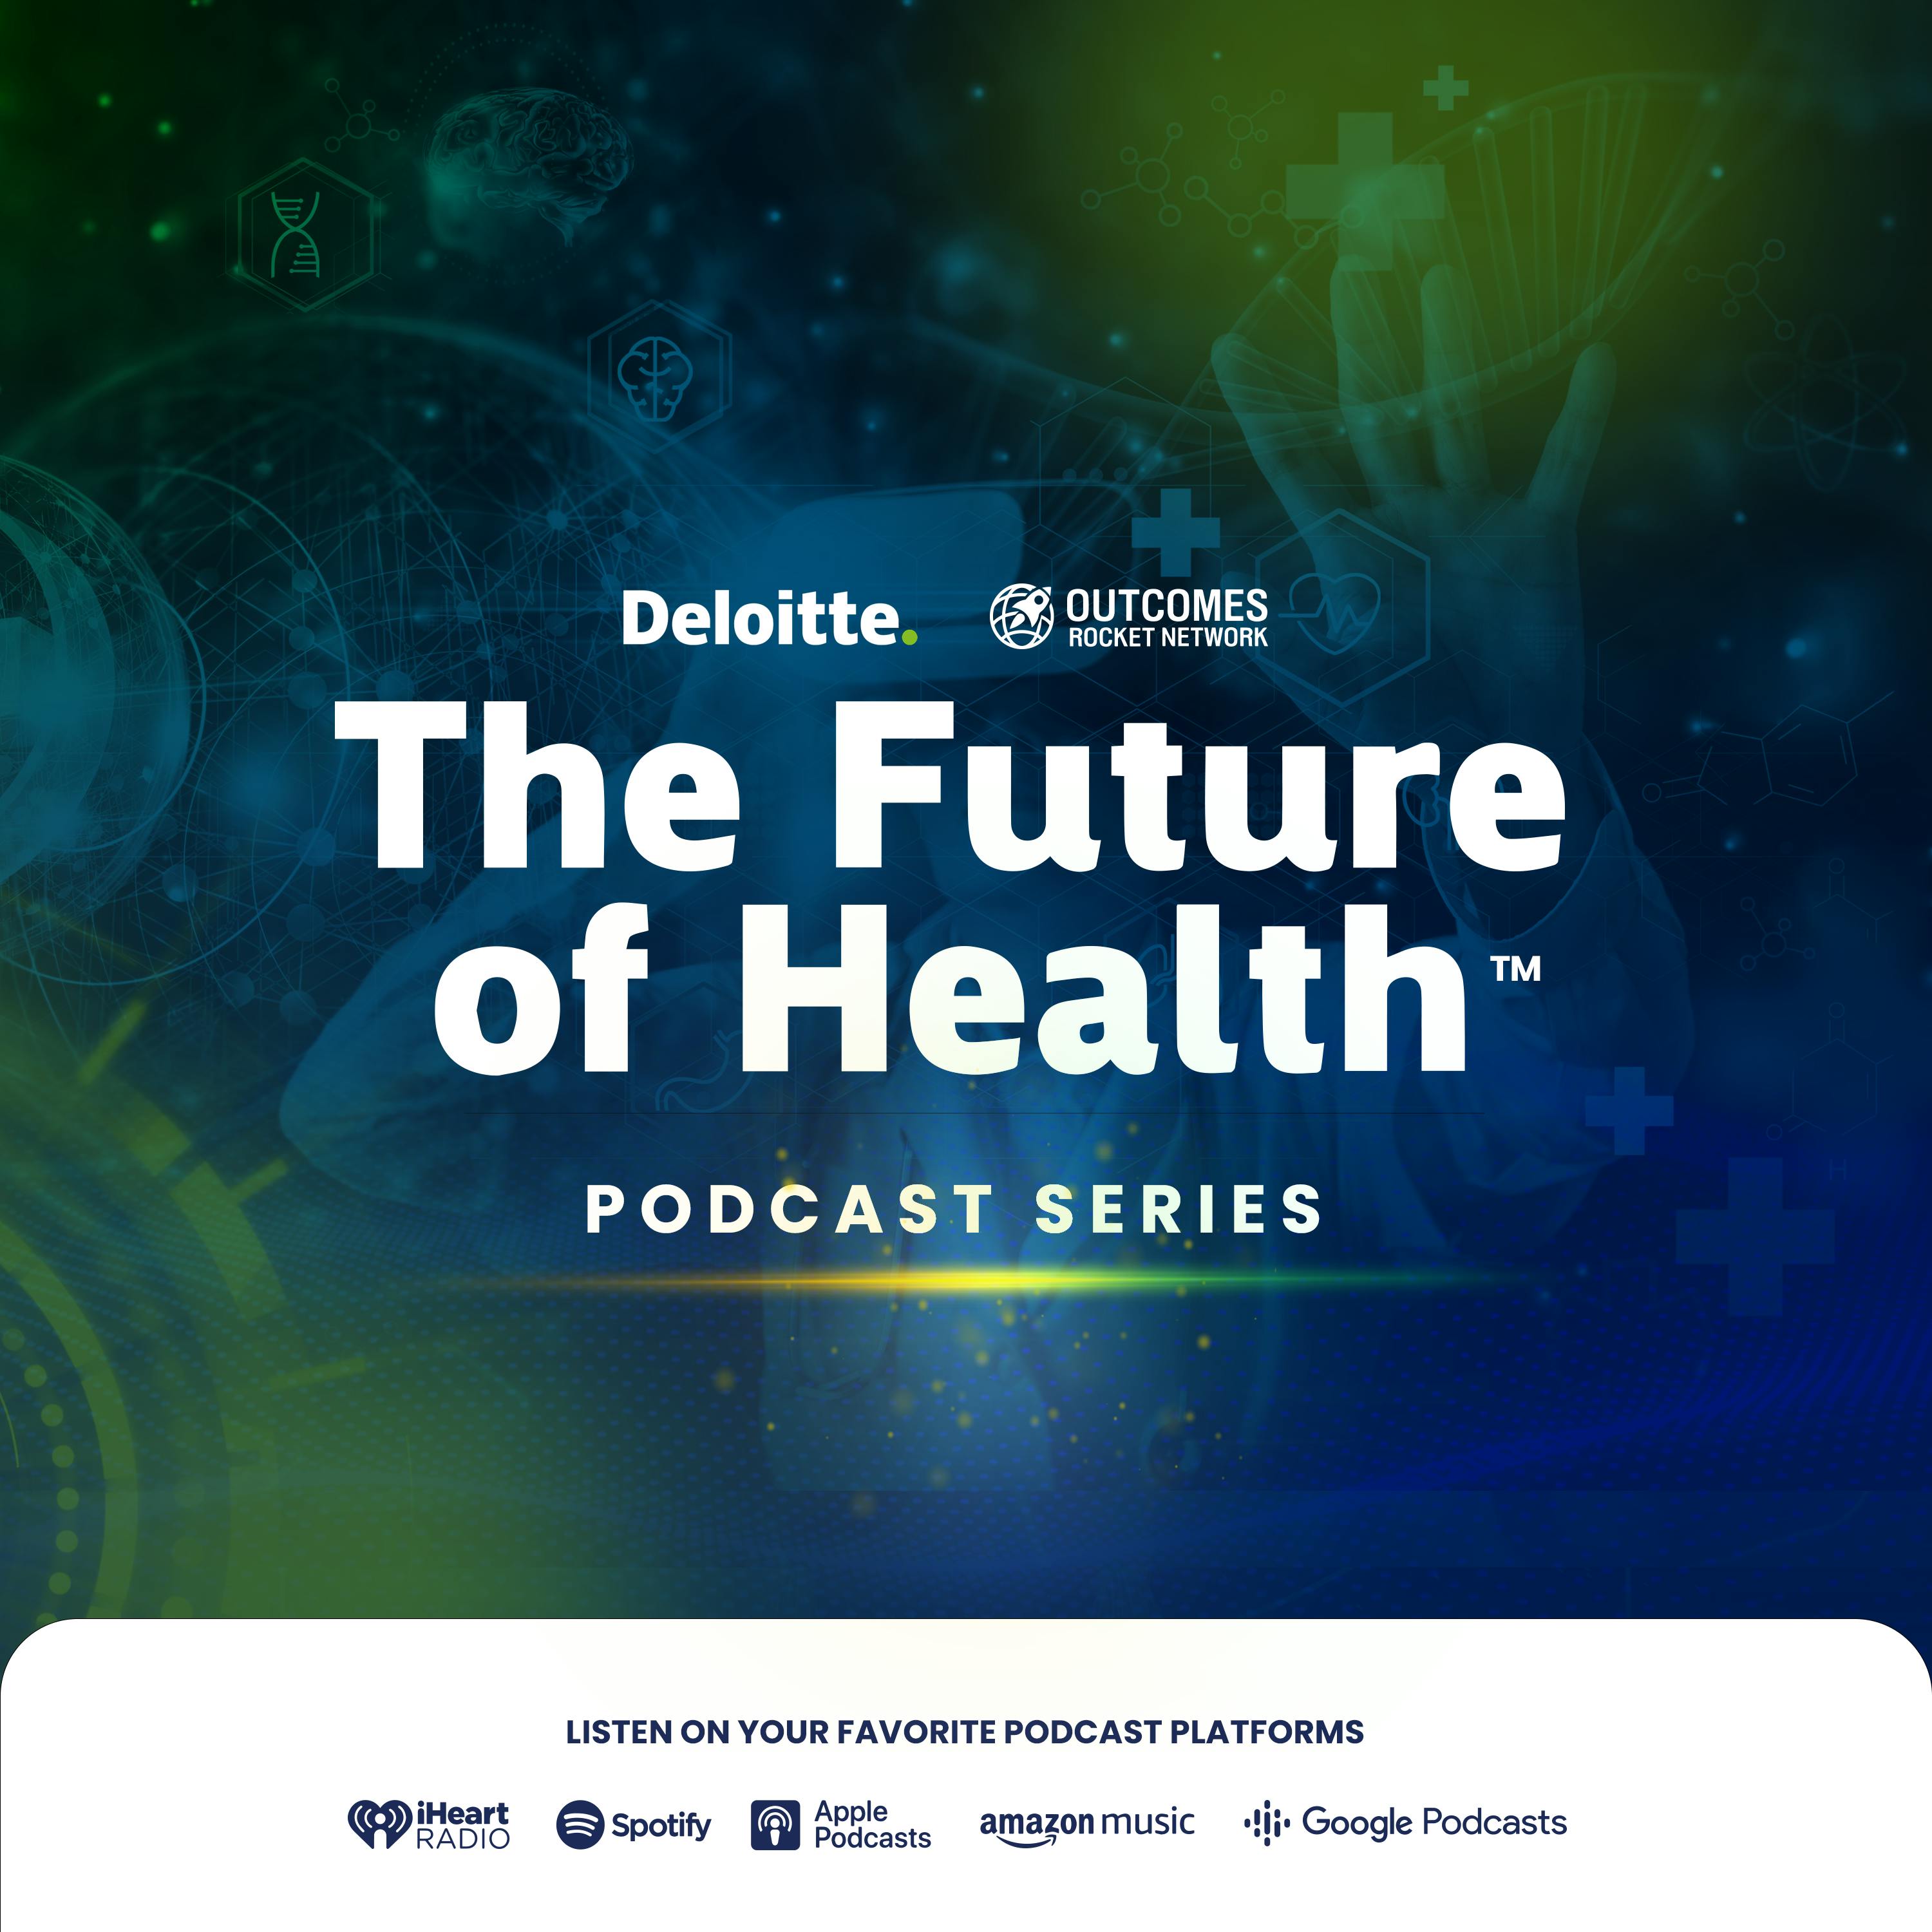 The Future of Health Series: Embracing Disruption: The Future of Health Is Now with Neal Batra, Principal at Deloitte Consulting LLP